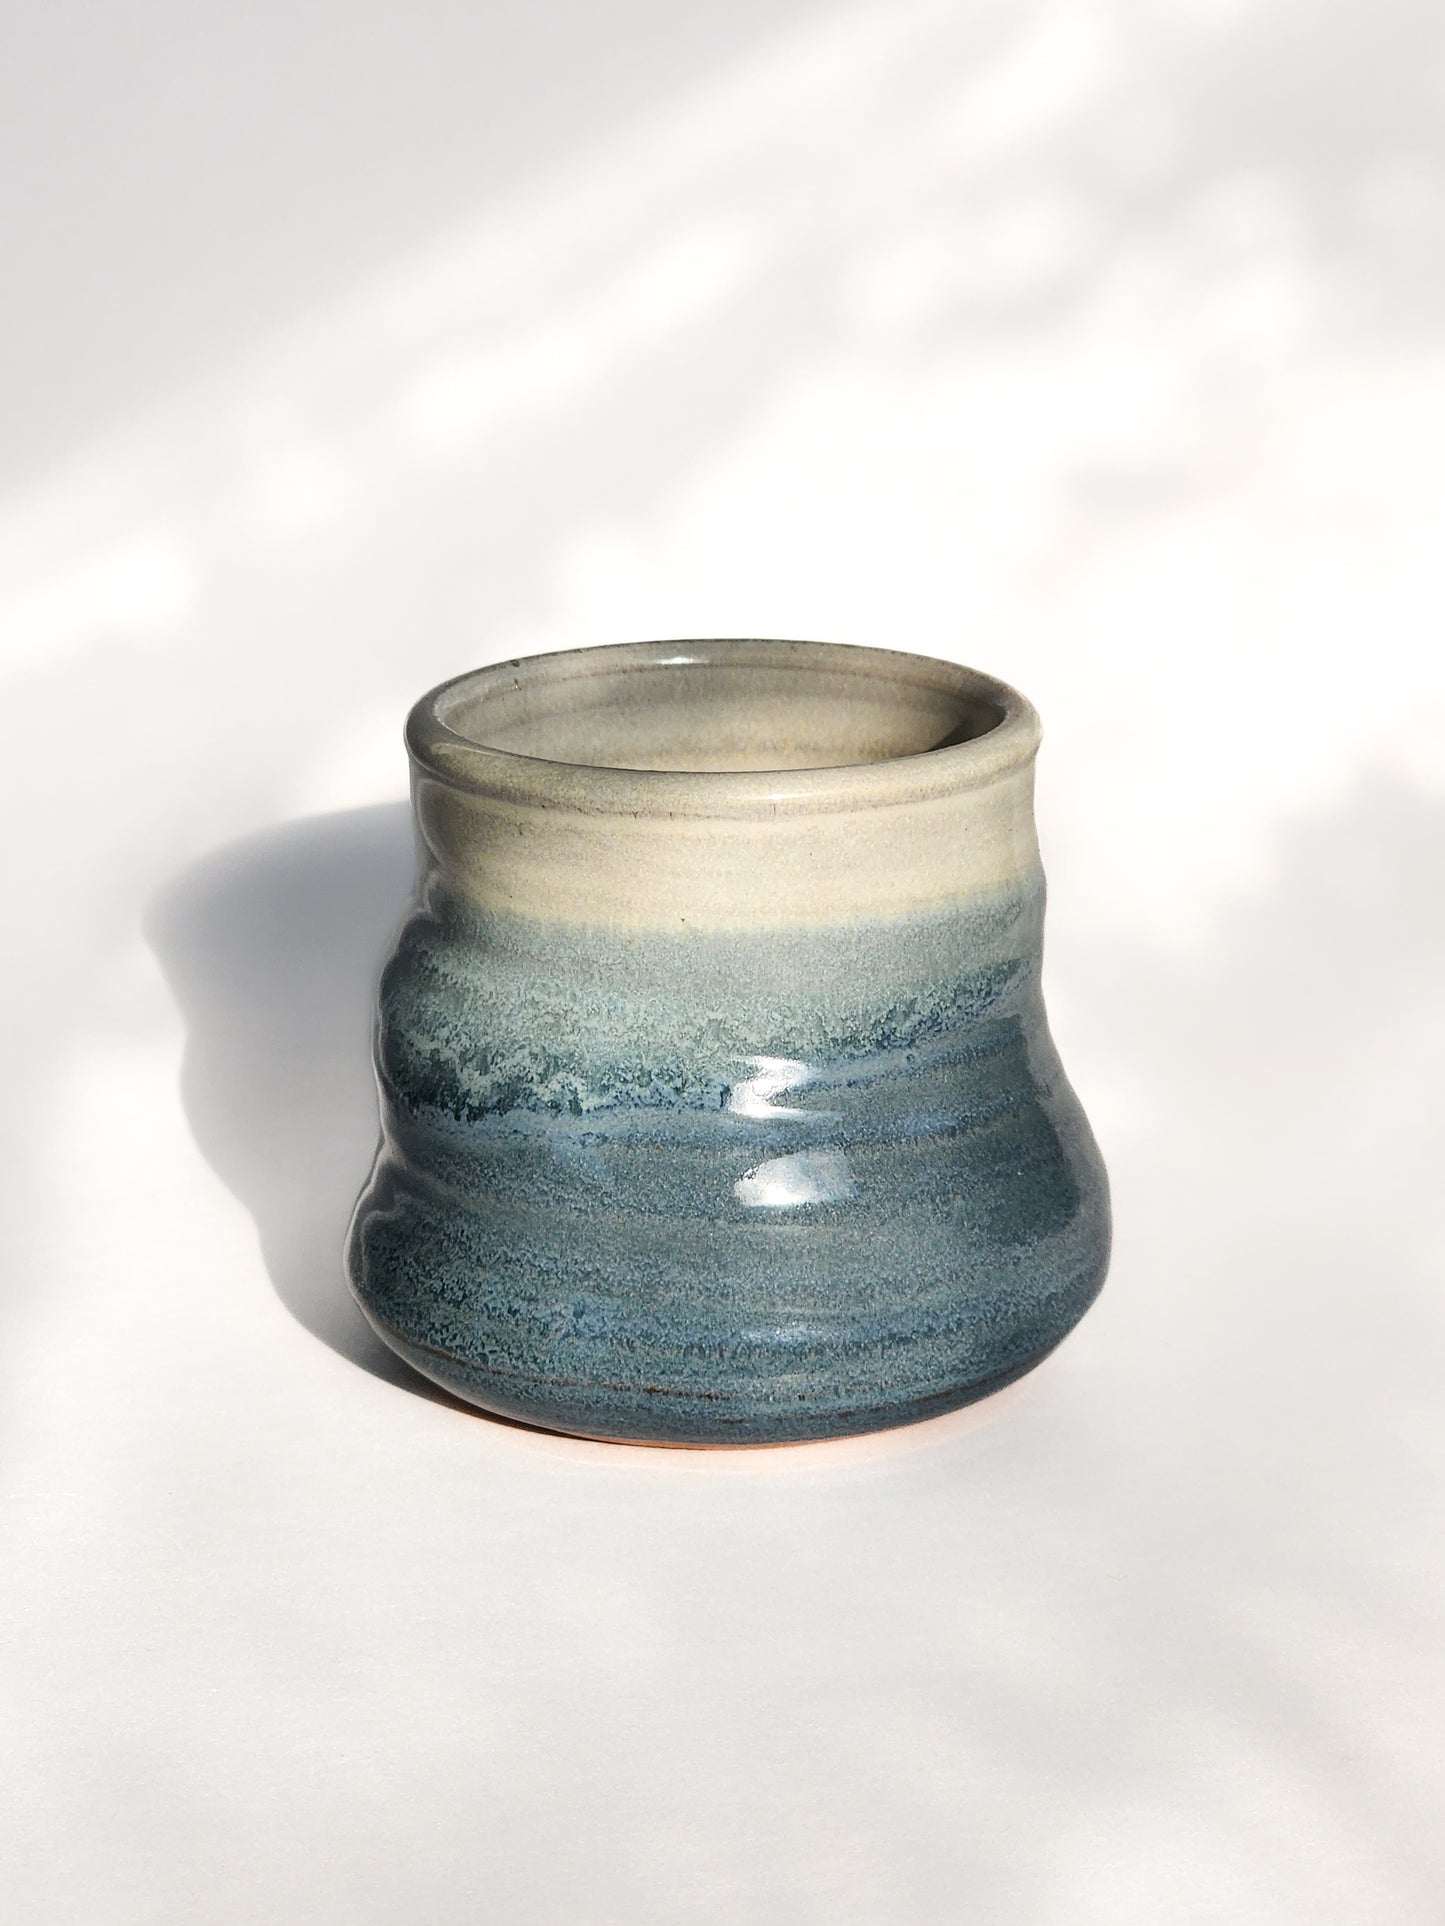 Image: Clinton Pottery's 8 oz Small Tumbler in Light Blue – A visually appealing addition with a cool, curvy design for a comfortable grip. This machine washable tumbler, crafted with care, adds contemporary elegance. The serene Light Blue color brings a calming and refreshing touch, reminiscent of clear skies and tranquil waters.